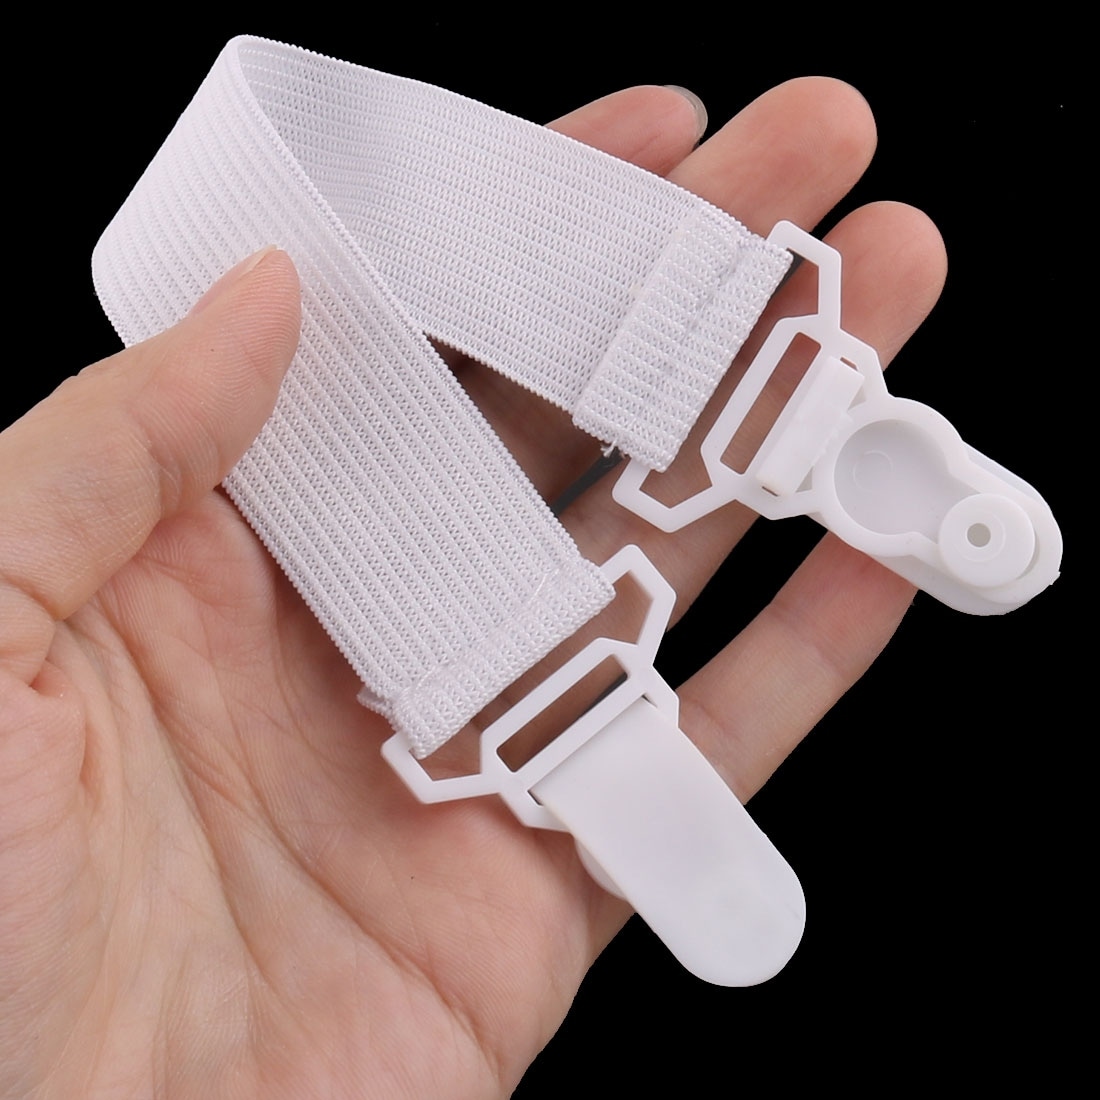 Bed Sheet Grippers Fasteners Bed Sheet Clips Keep Sheets Snug, 8 Pieces